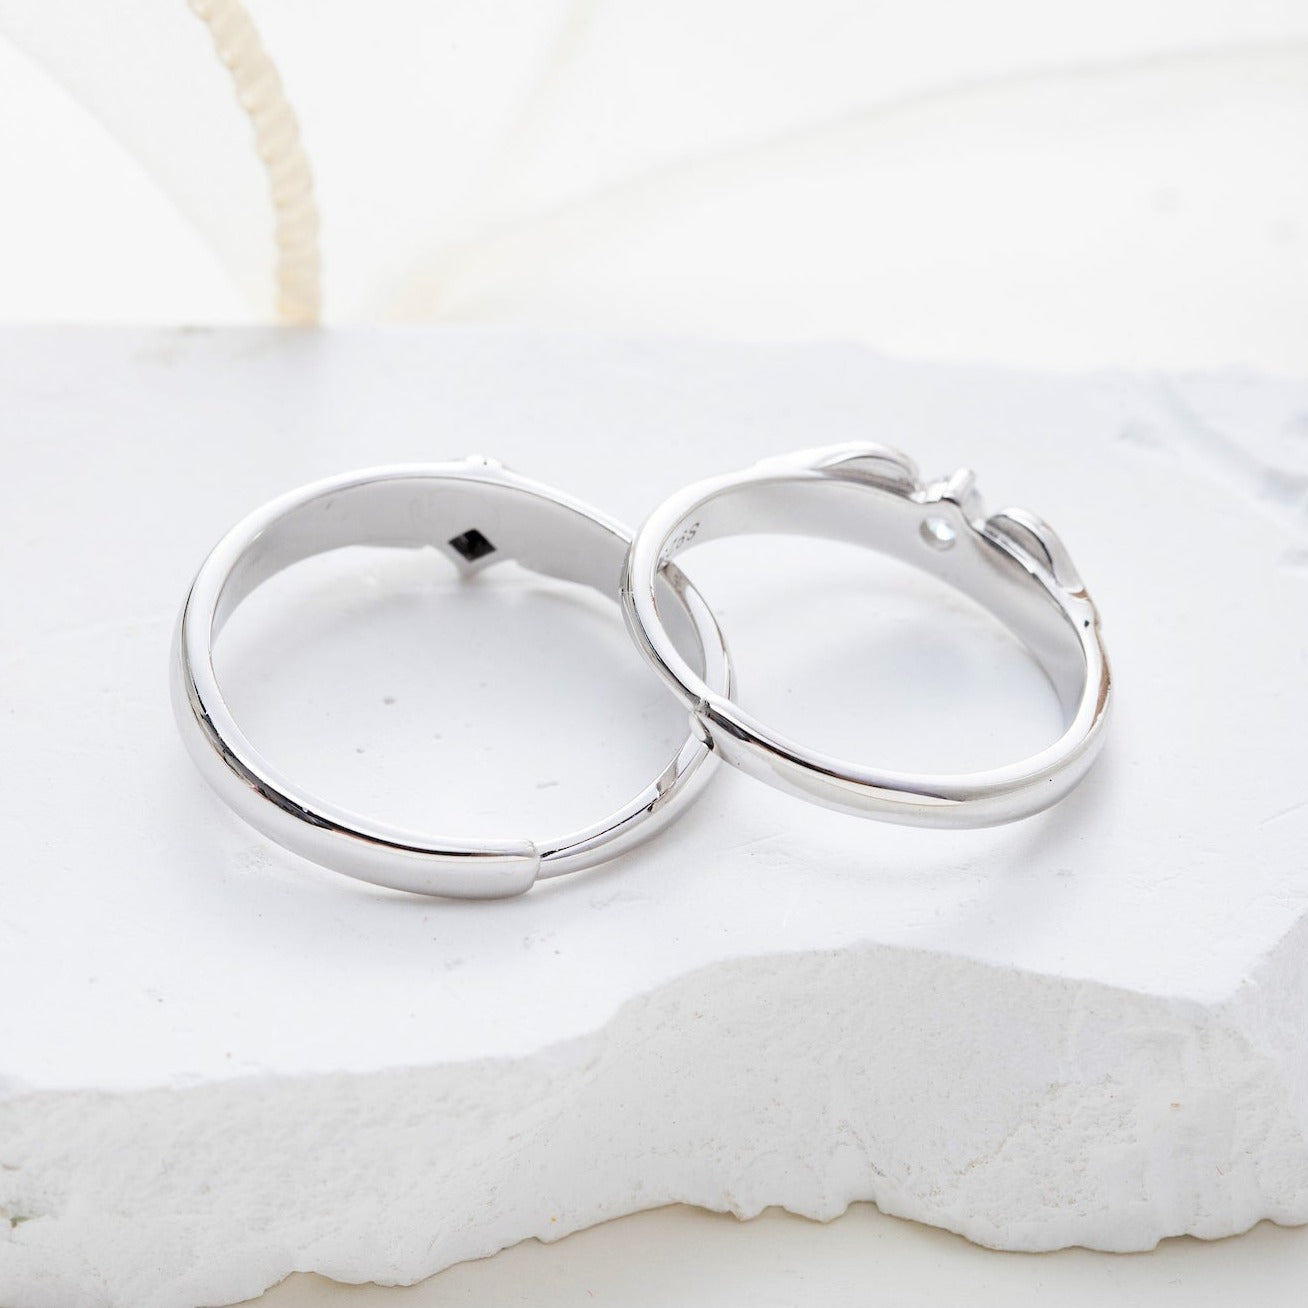 Buy 2Pcs Couple Finger Ring Couple Rings Elegant Simple Ring Finger Jewelry  Silver ( Men' s and Women' s ) at Amazon.in